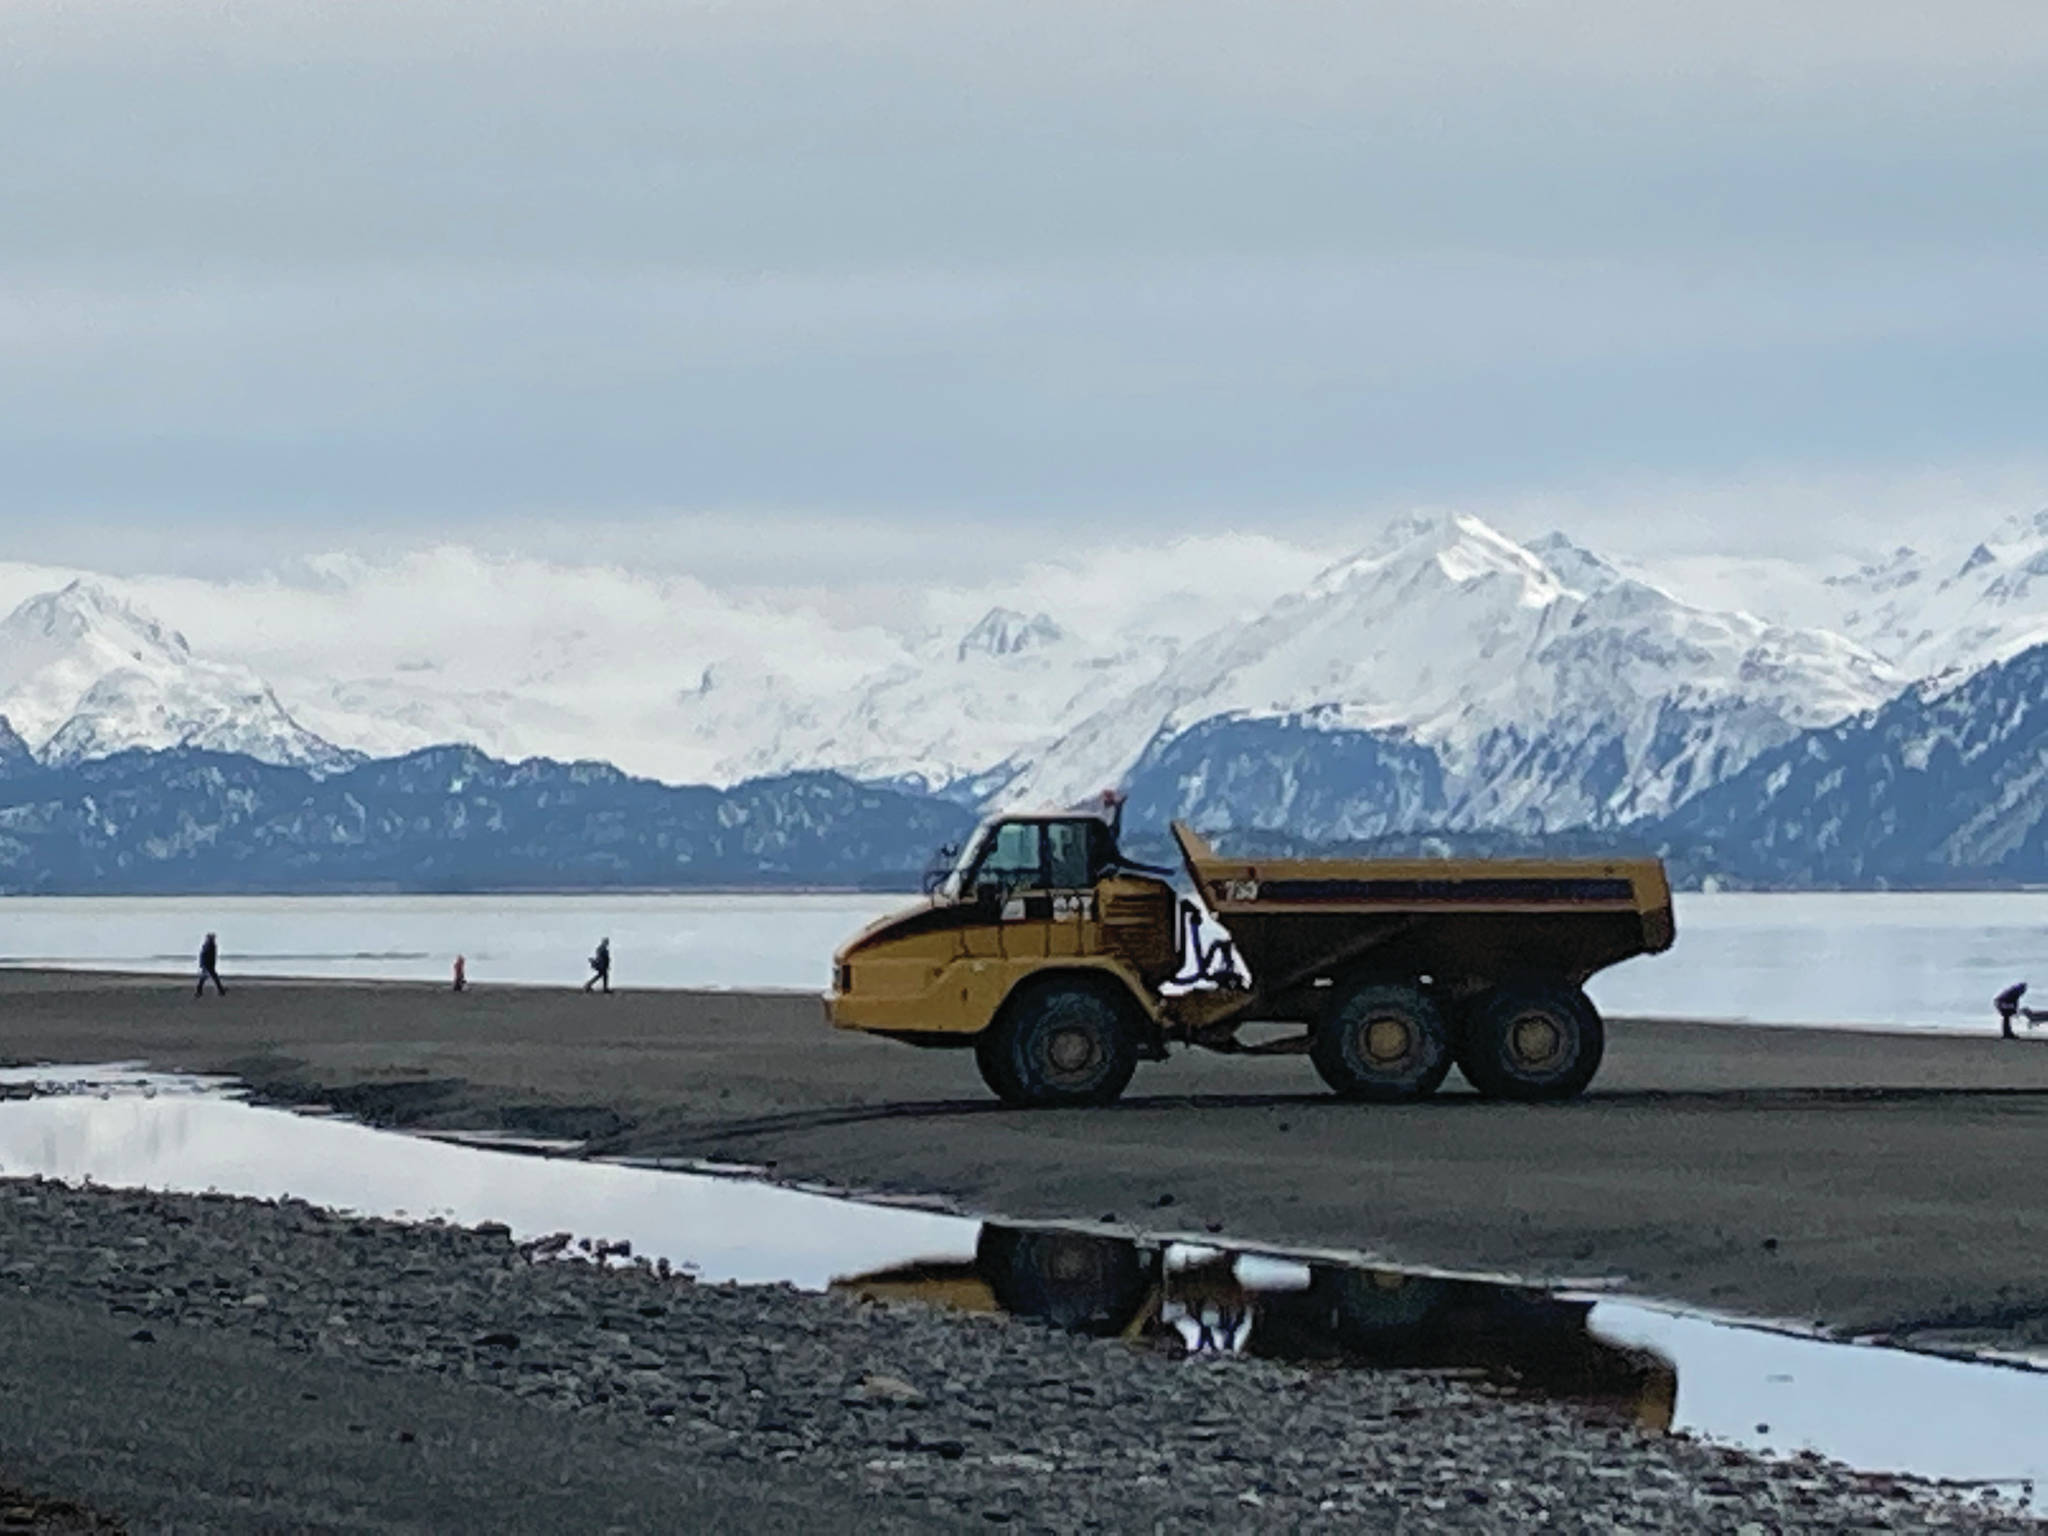 Workers with Psenak Construction return with an empty load after dumping armor rock at the Ocean Drive seawall on Monday, March 22, 2021, at Mariner Park on the Homer Spit in Homer, Alaska. (Photo by Michael Armstrong/Homer News)